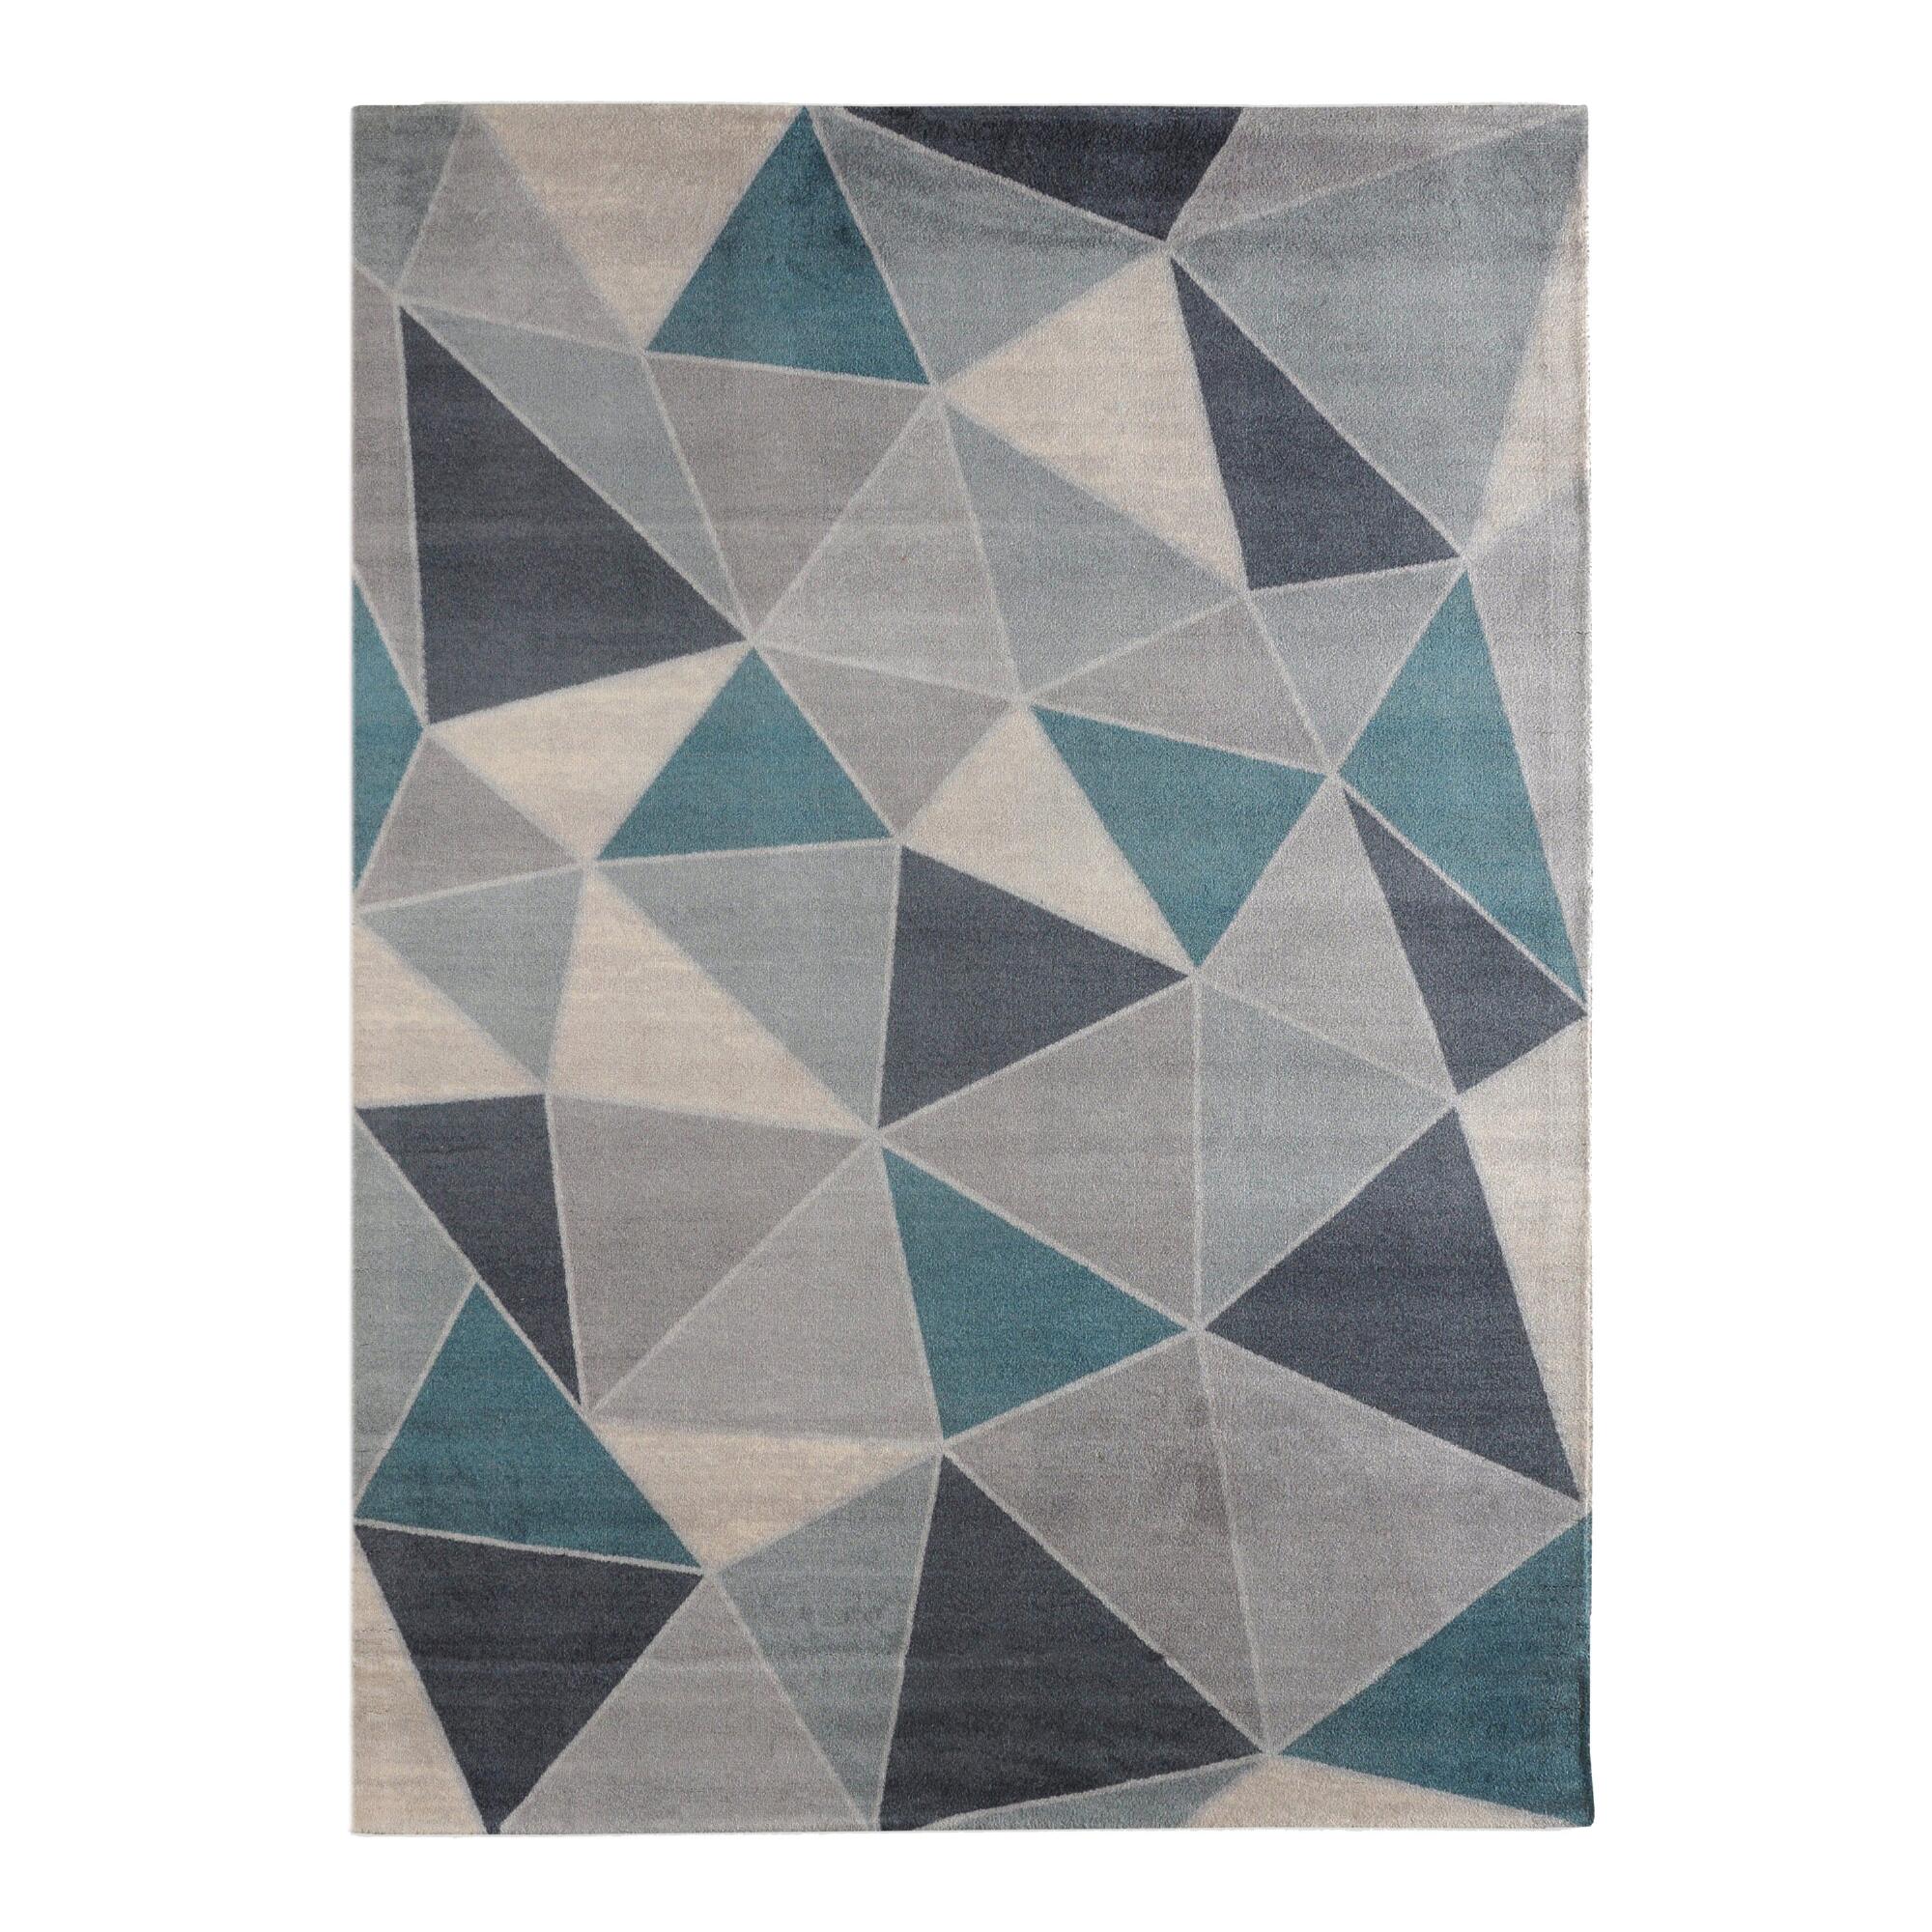 Teal and Blue Mid Century Geometric Vonnegut Area Rug: Green - Nylon - 8' x 10' by World Market